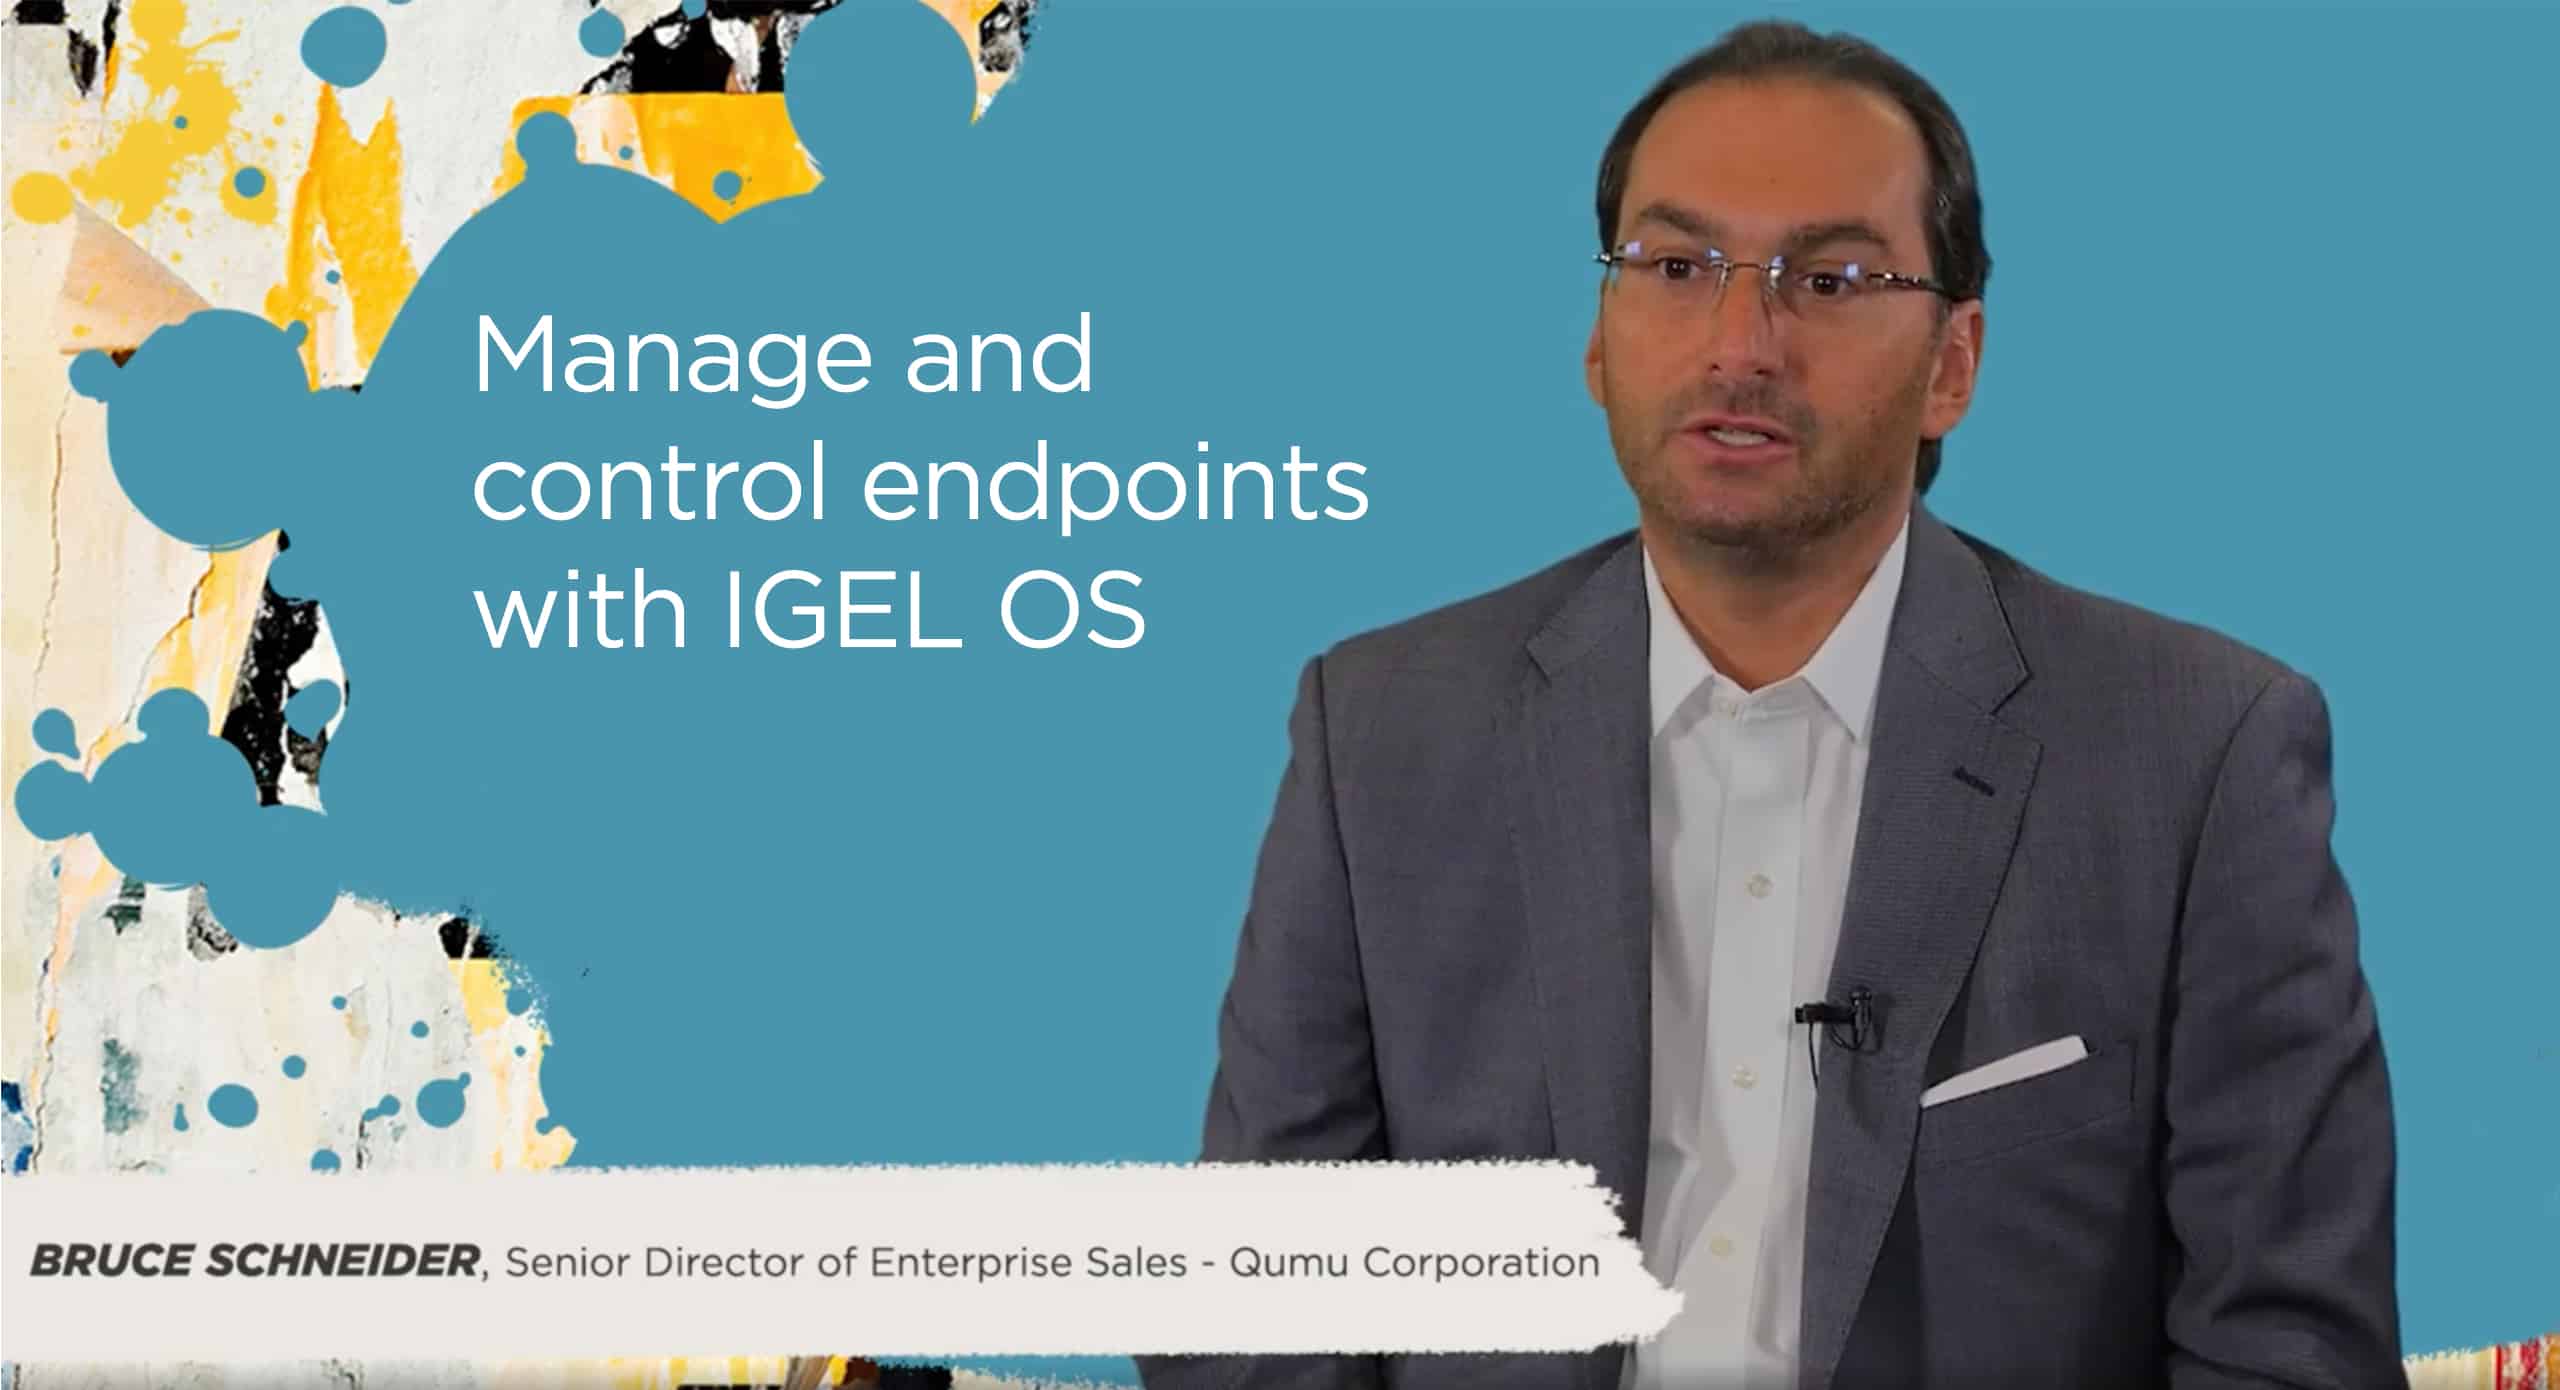 Manage and control endpoints with IGEL OS